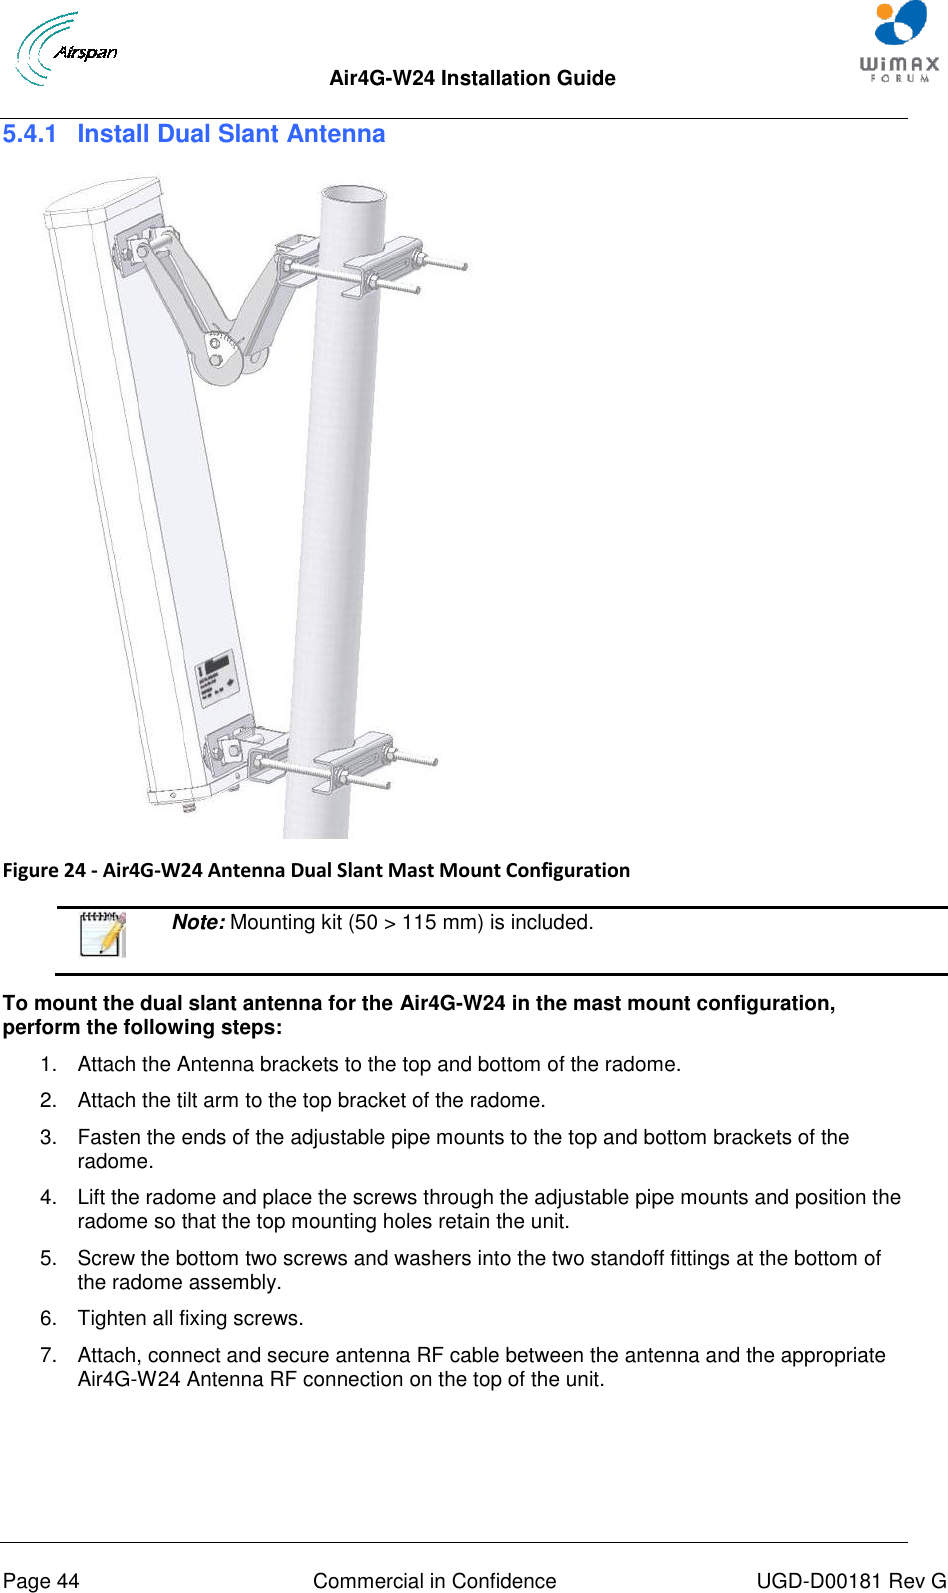  Air4G-W24 Installation Guide       Page 44  Commercial in Confidence  UGD-D00181 Rev G 5.4.1  Install Dual Slant Antenna   Figure 24 - Air4G-W24 Antenna Dual Slant Mast Mount Configuration    Note: Mounting kit (50 &gt; 115 mm) is included.  To mount the dual slant antenna for the Air4G-W24 in the mast mount configuration, perform the following steps: 1.  Attach the Antenna brackets to the top and bottom of the radome.  2.  Attach the tilt arm to the top bracket of the radome. 3.  Fasten the ends of the adjustable pipe mounts to the top and bottom brackets of the radome. 4.  Lift the radome and place the screws through the adjustable pipe mounts and position the radome so that the top mounting holes retain the unit. 5.  Screw the bottom two screws and washers into the two standoff fittings at the bottom of the radome assembly. 6.  Tighten all fixing screws. 7.  Attach, connect and secure antenna RF cable between the antenna and the appropriate Air4G-W24 Antenna RF connection on the top of the unit.    